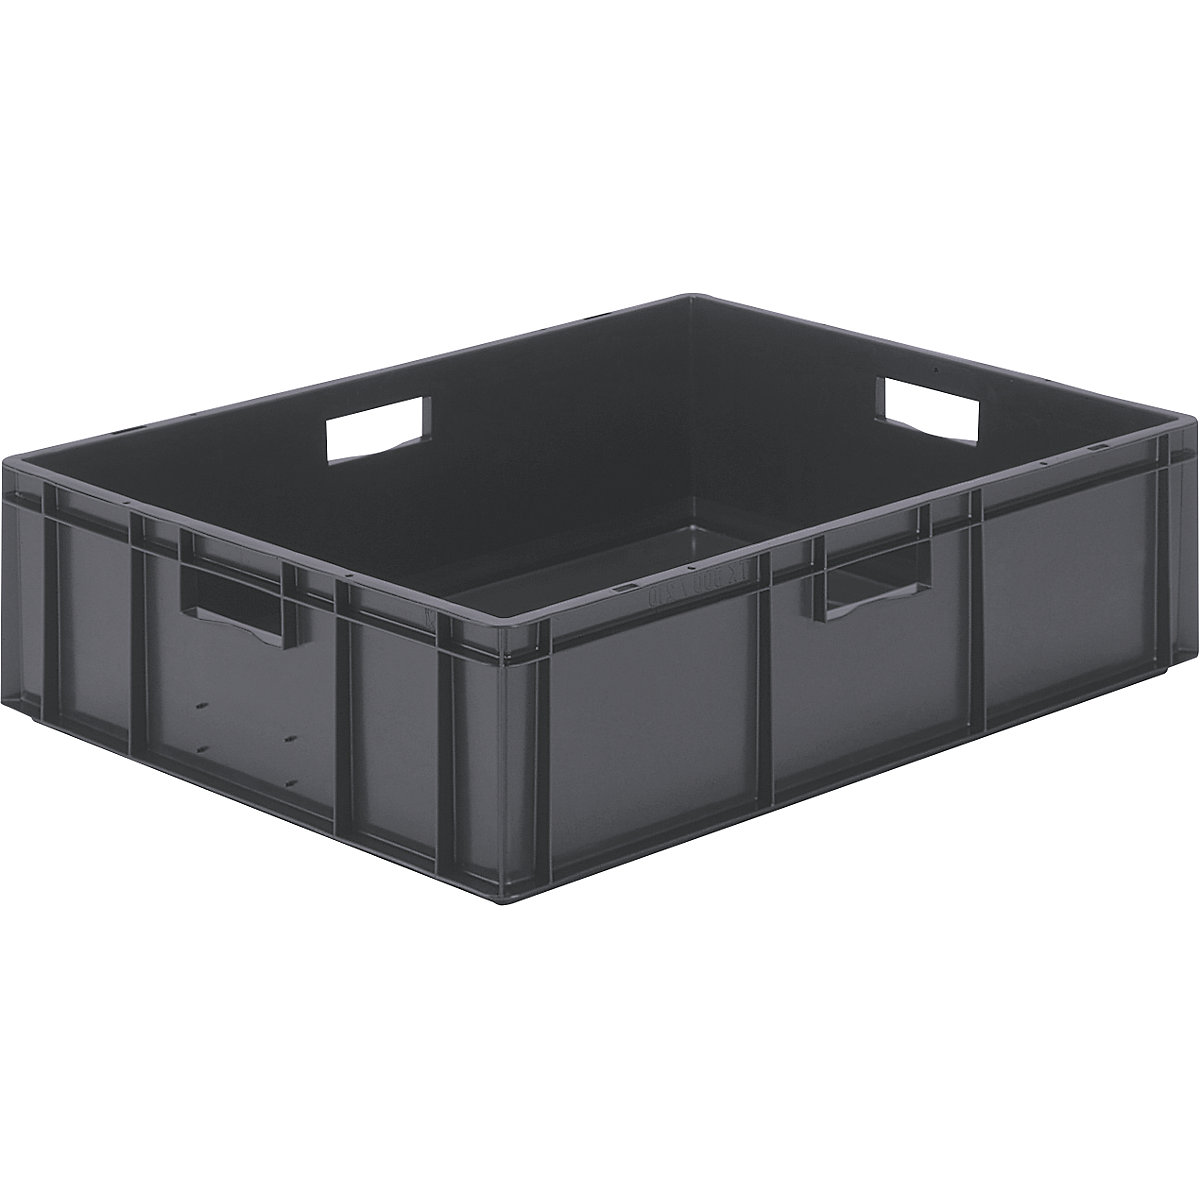 Euro stacking container, closed walls and base, LxWxH 800 x 600 x 210 mm, grey, pack of 2-7